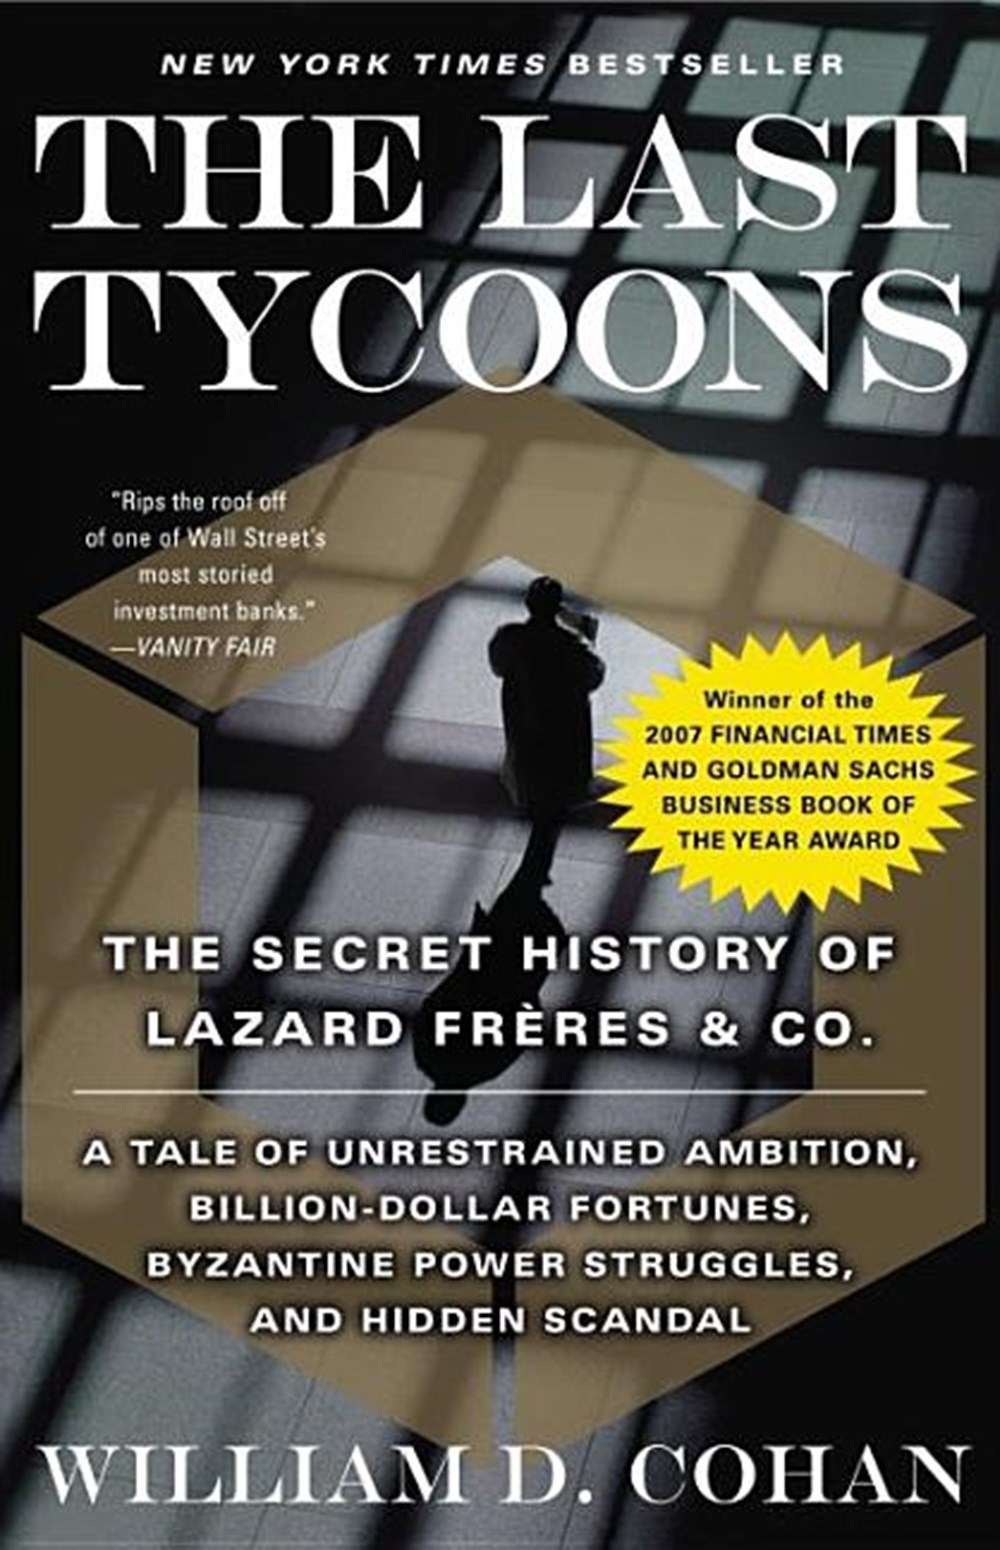 Last Tycoons: The Secret History of Lazard Frères & Co.